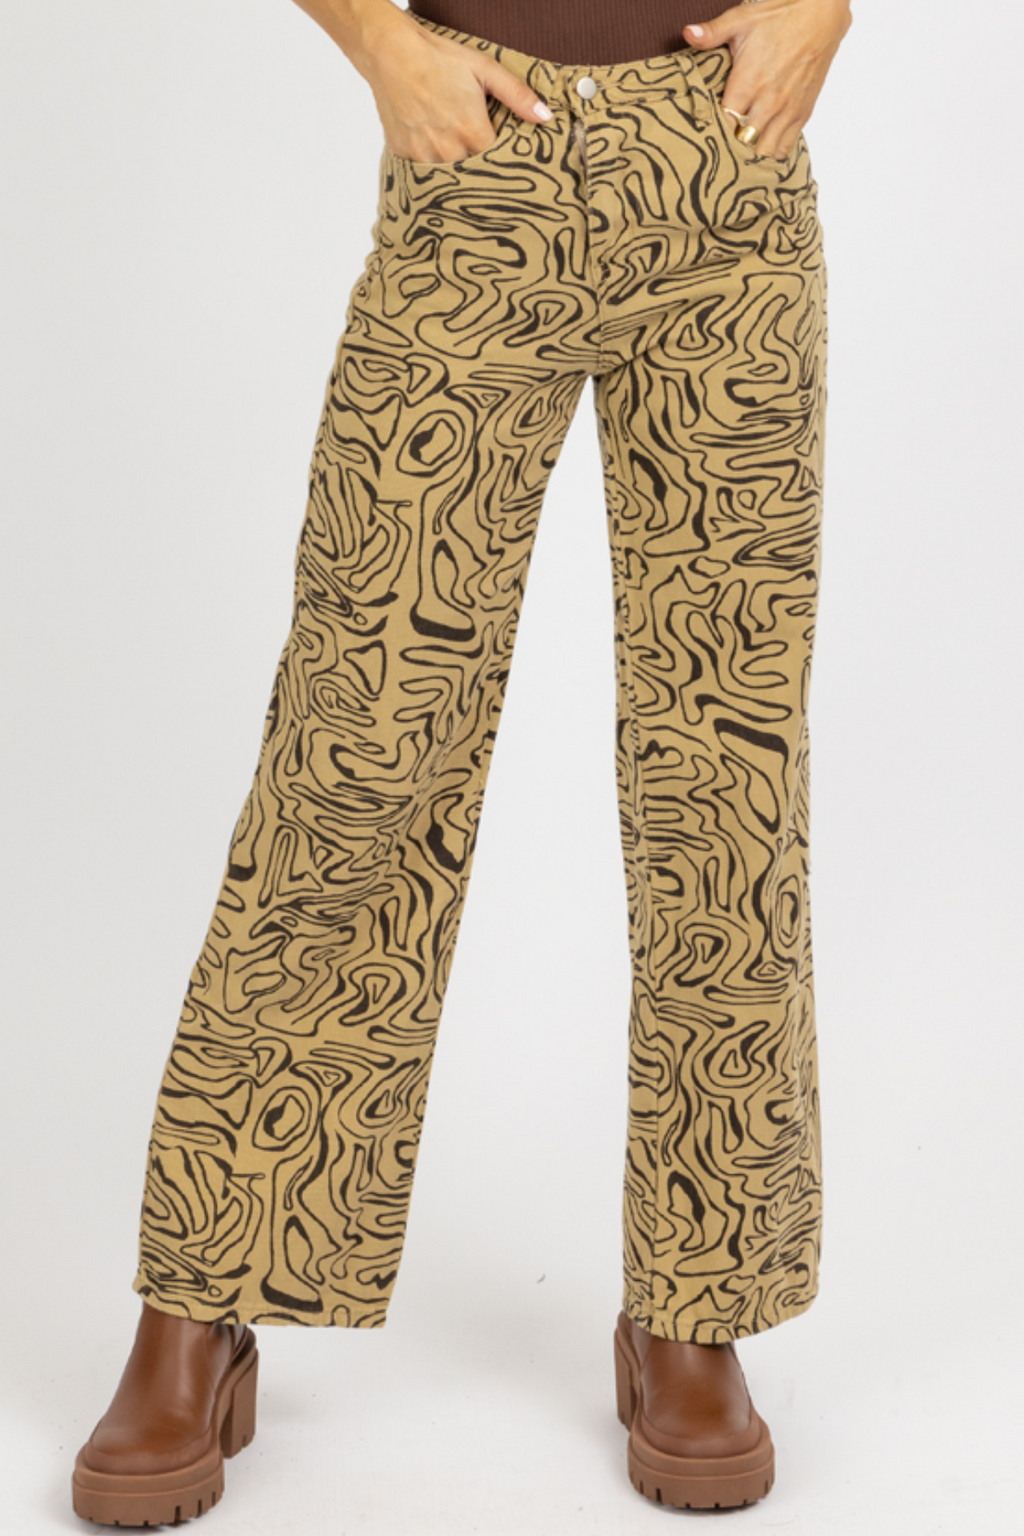 TAUPE ABSTRACT HIGH RISE FLARE JEAN